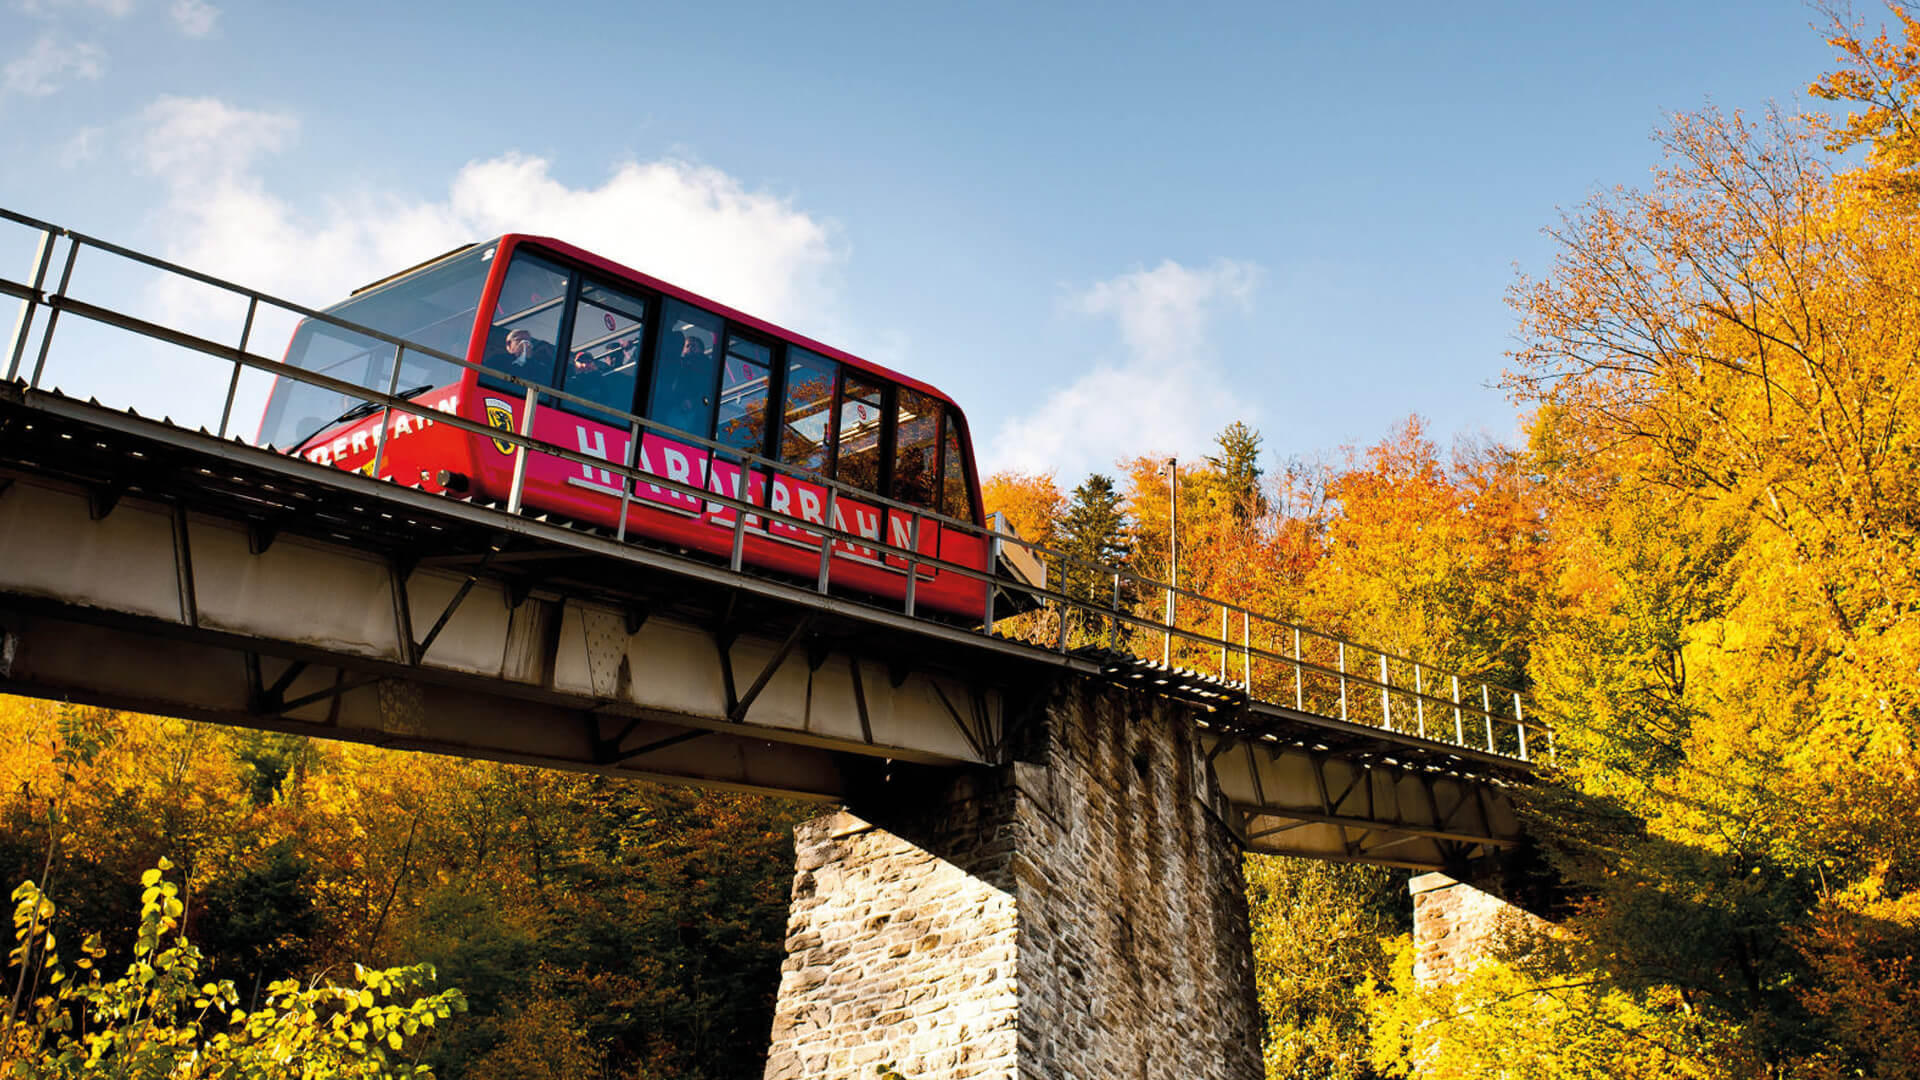 Enjoy the scenic beauty around you during the funicular ride from Interlaken to Harder Kulm